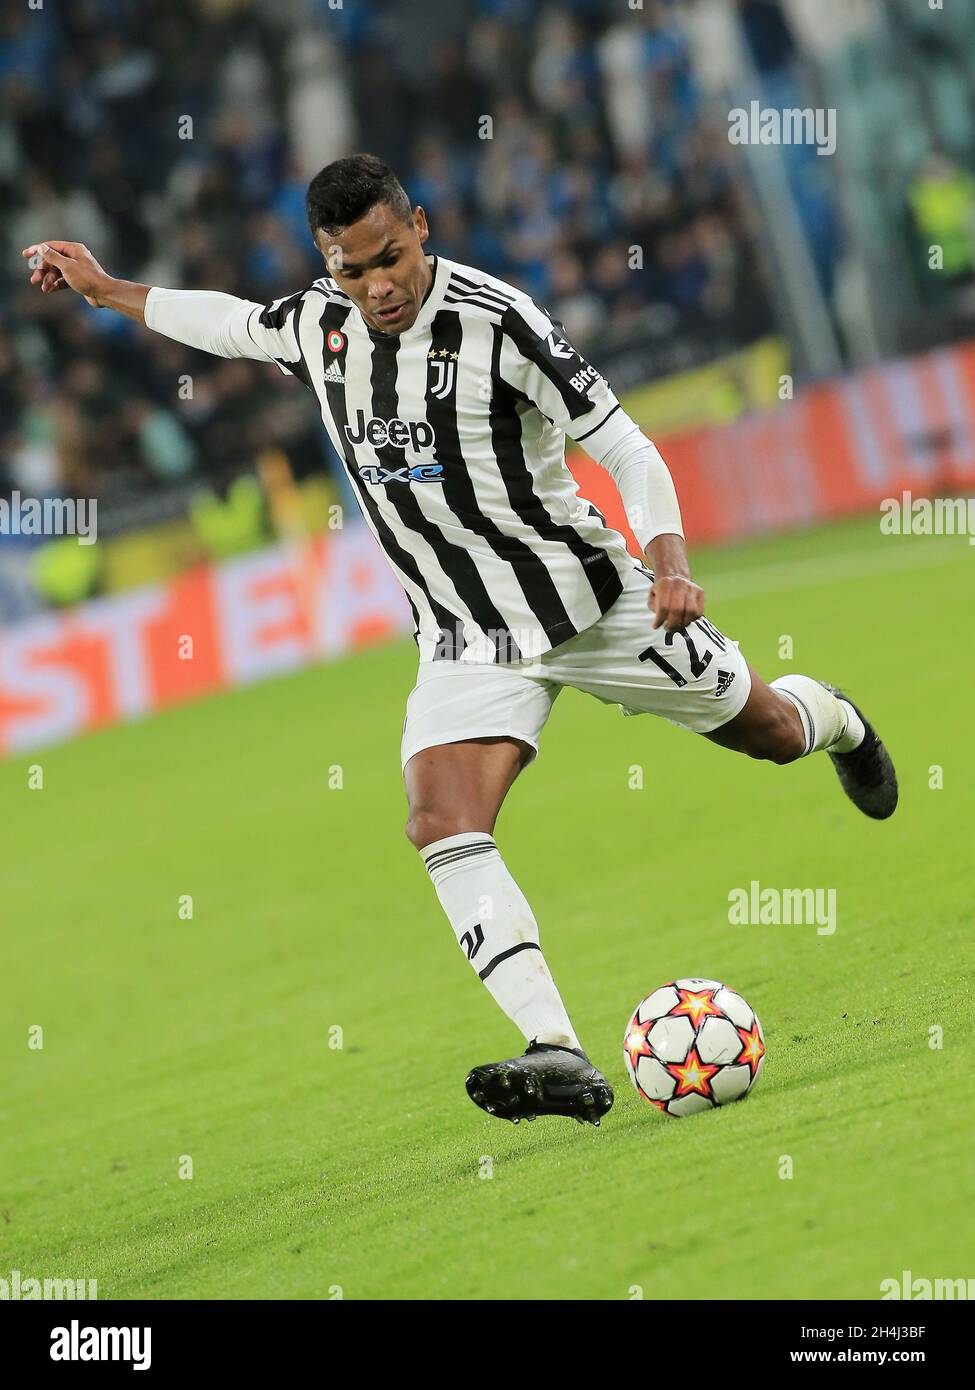 Turin Italy 02nd Nov 21 Alex Sandro Juventus Fc About To Shoot The Ball During Juventus Fc Vs Zenit St Petersburg Uefa Champions League Football Match In Turin Italy November 02 21